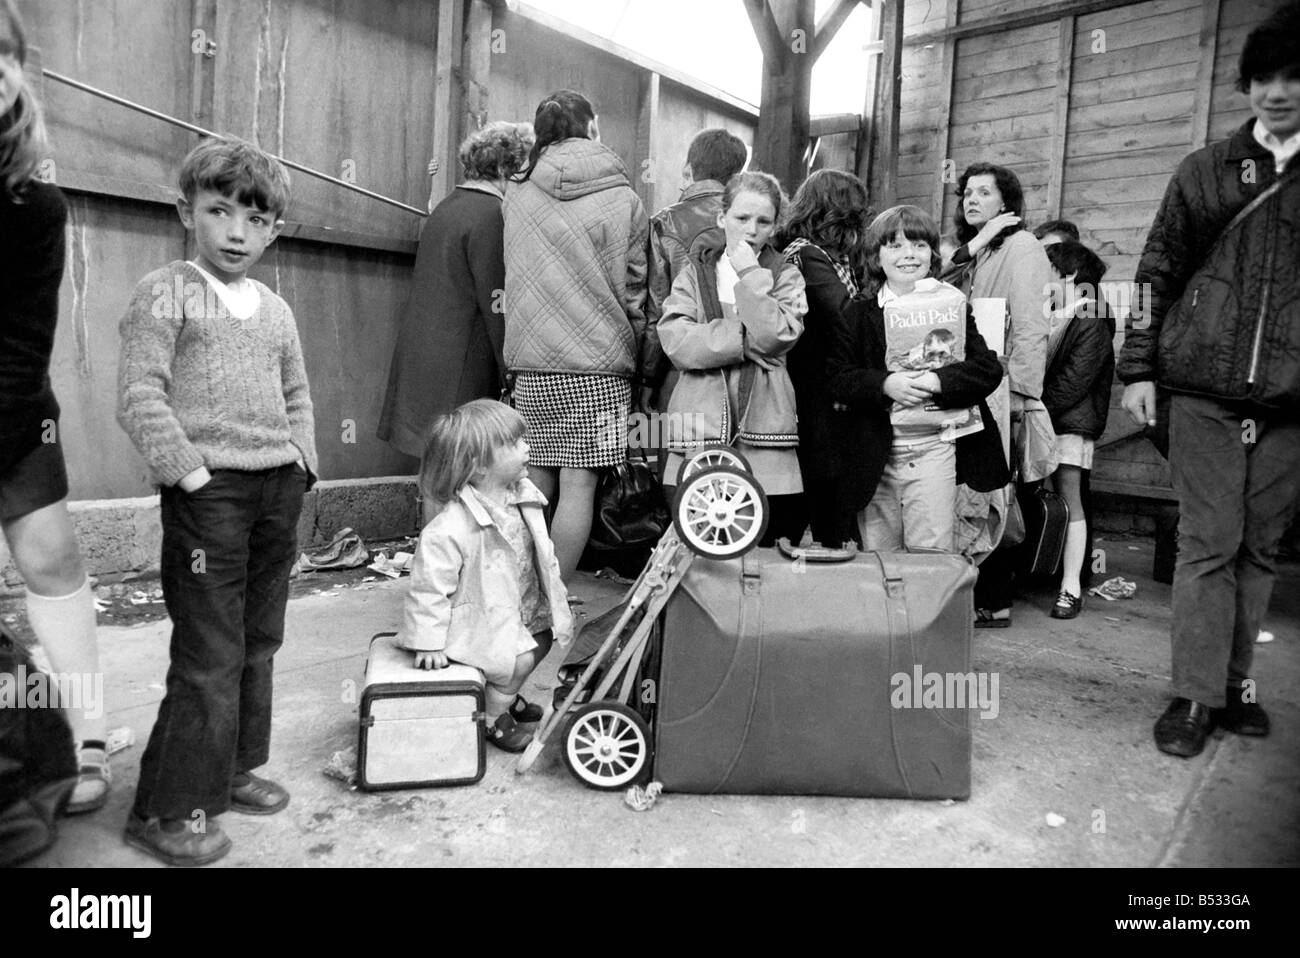 George Phillips, staff. Northern Ireland July 1972. Children waiting for the train in Belfast as families flee from the bombs and bullets. July 1972. July 1972 72-7262-002 Stock Photo